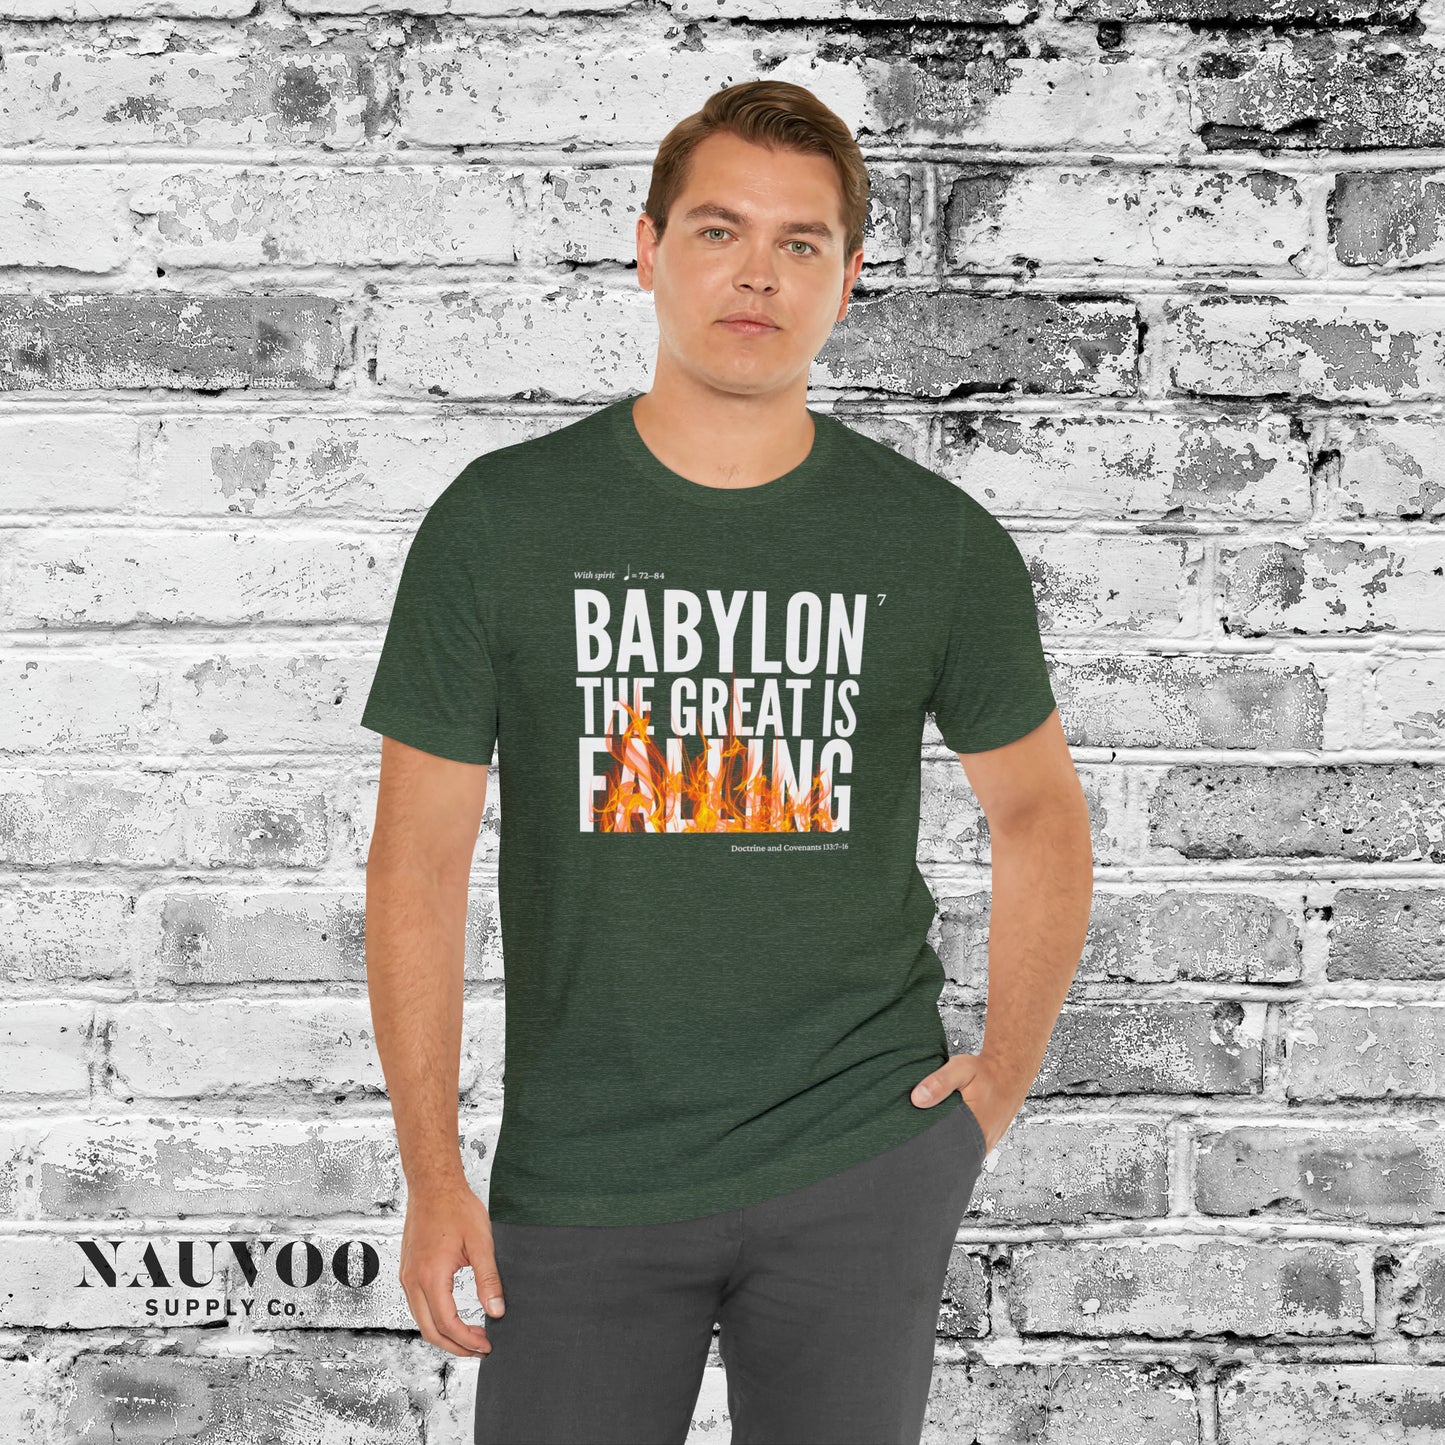 Babylon the Great is Falling T-Shirt